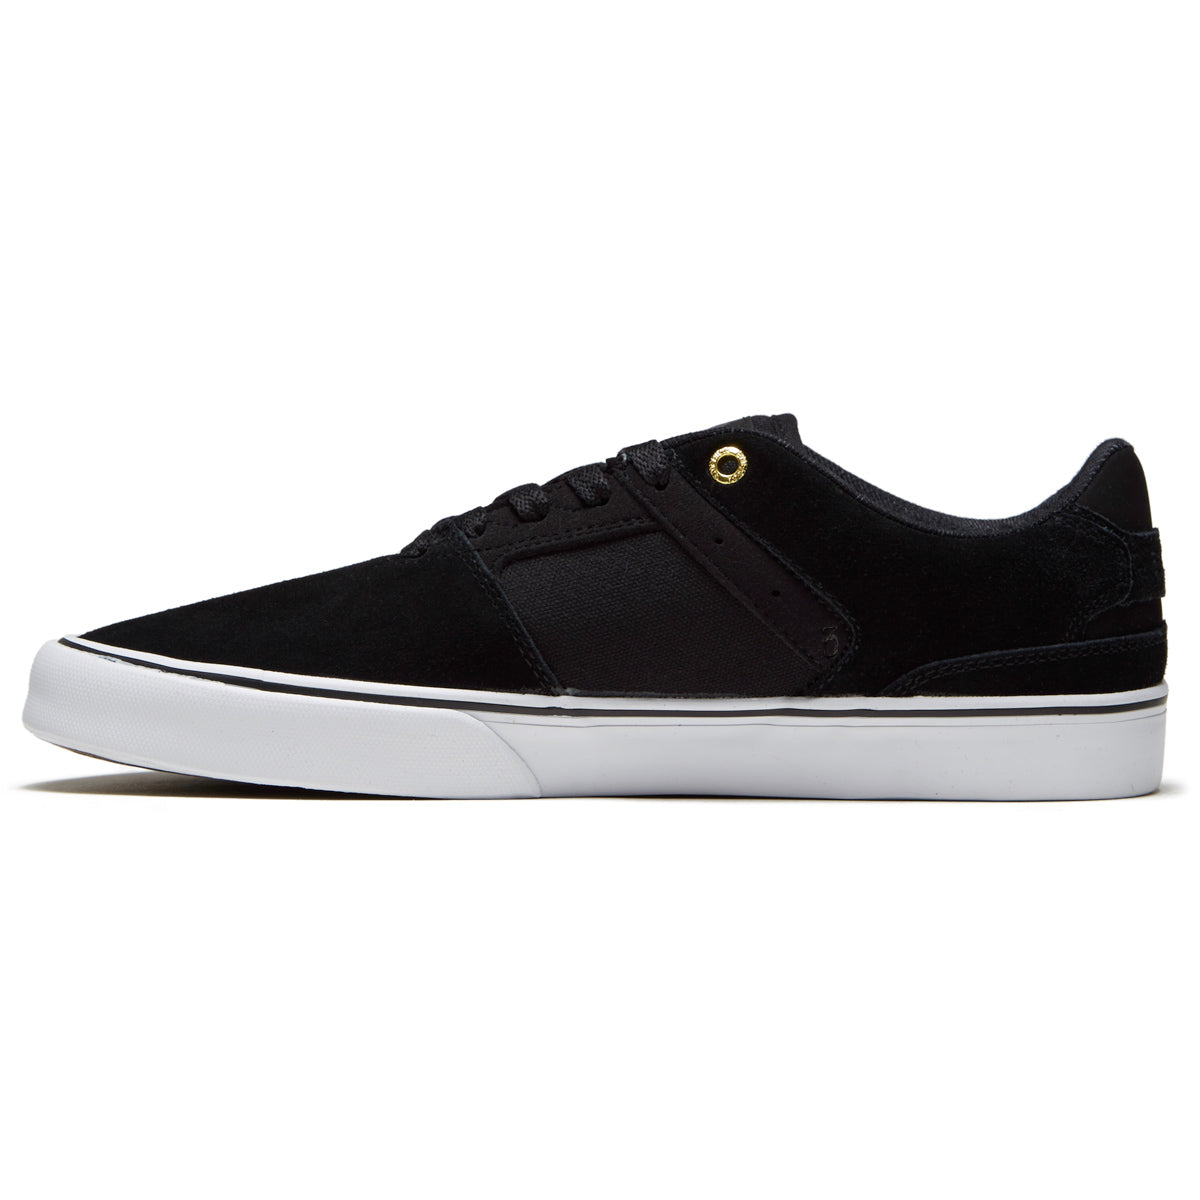 Emerica The Low Vulc Shoes - Black/Gold/White image 2